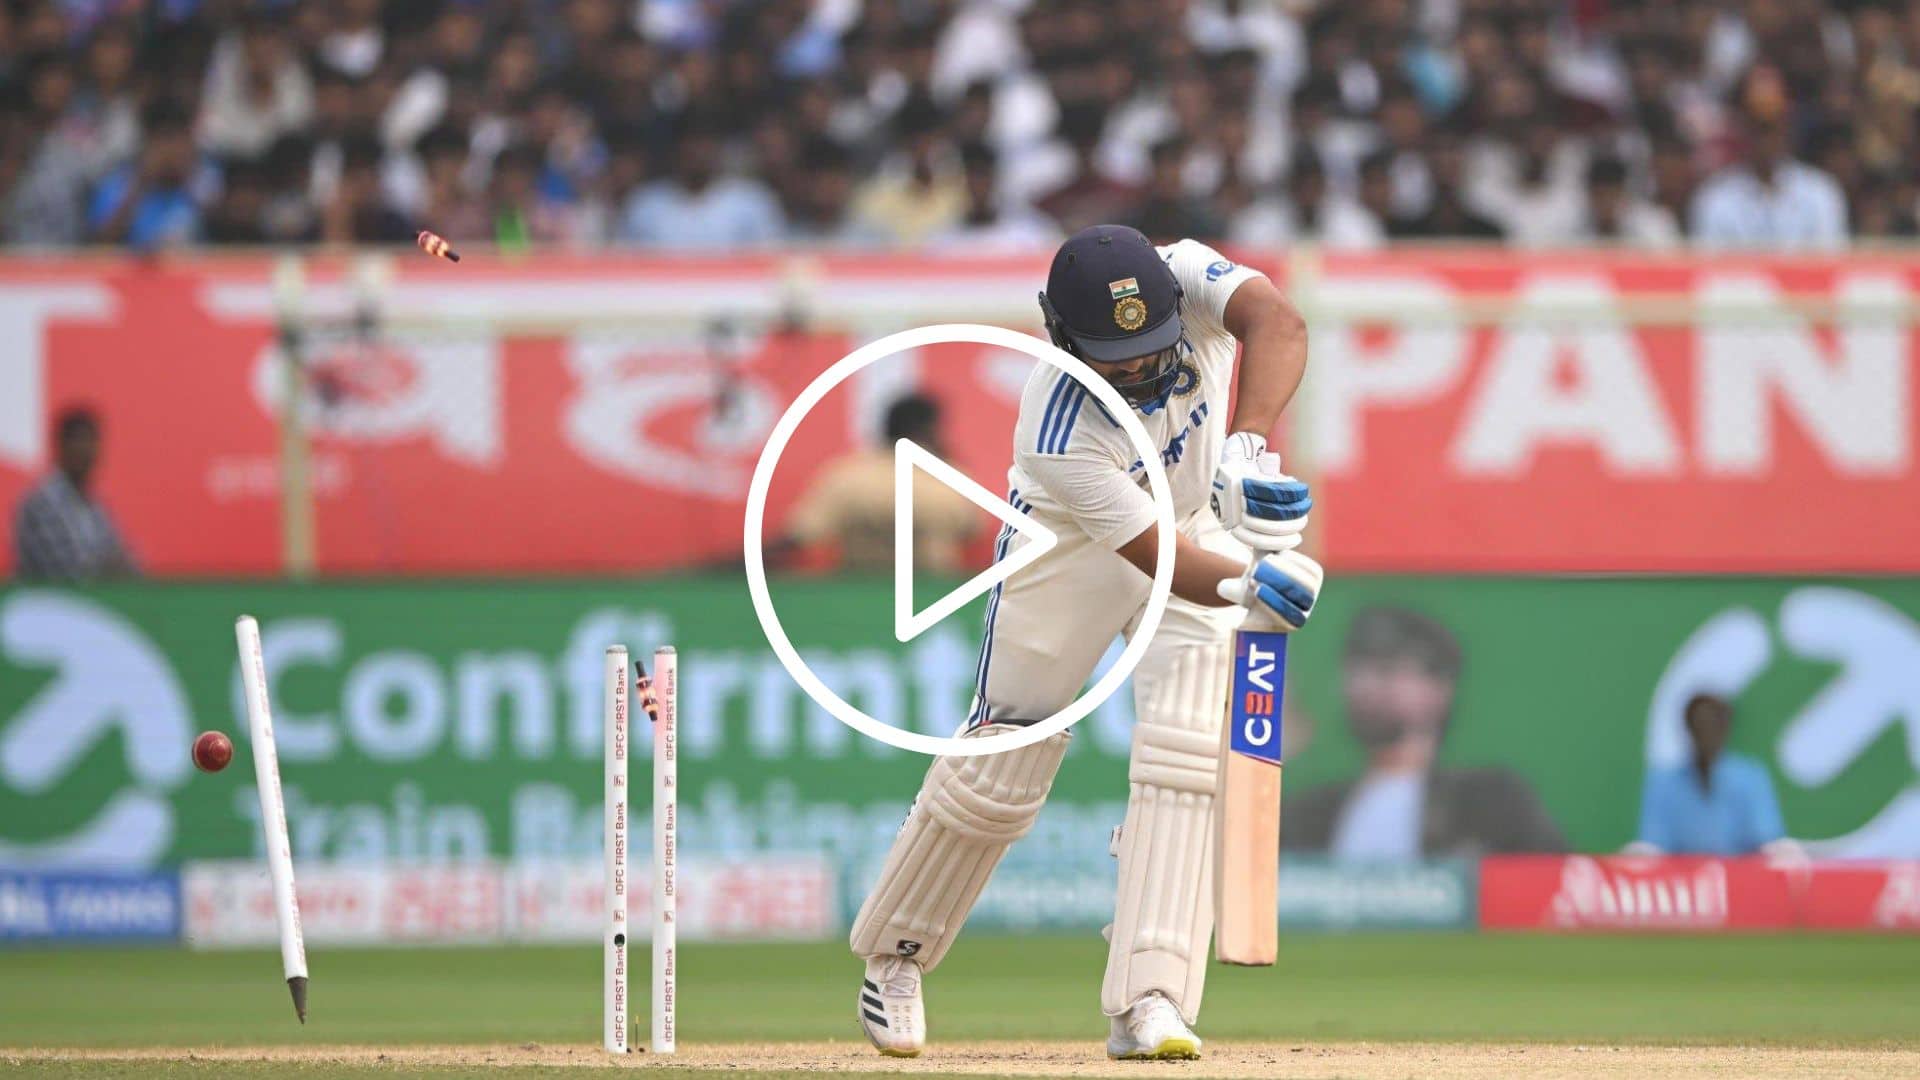 [Watch] James Anderson's Masterful Delivery Claims Rohit Sharma's Wicket